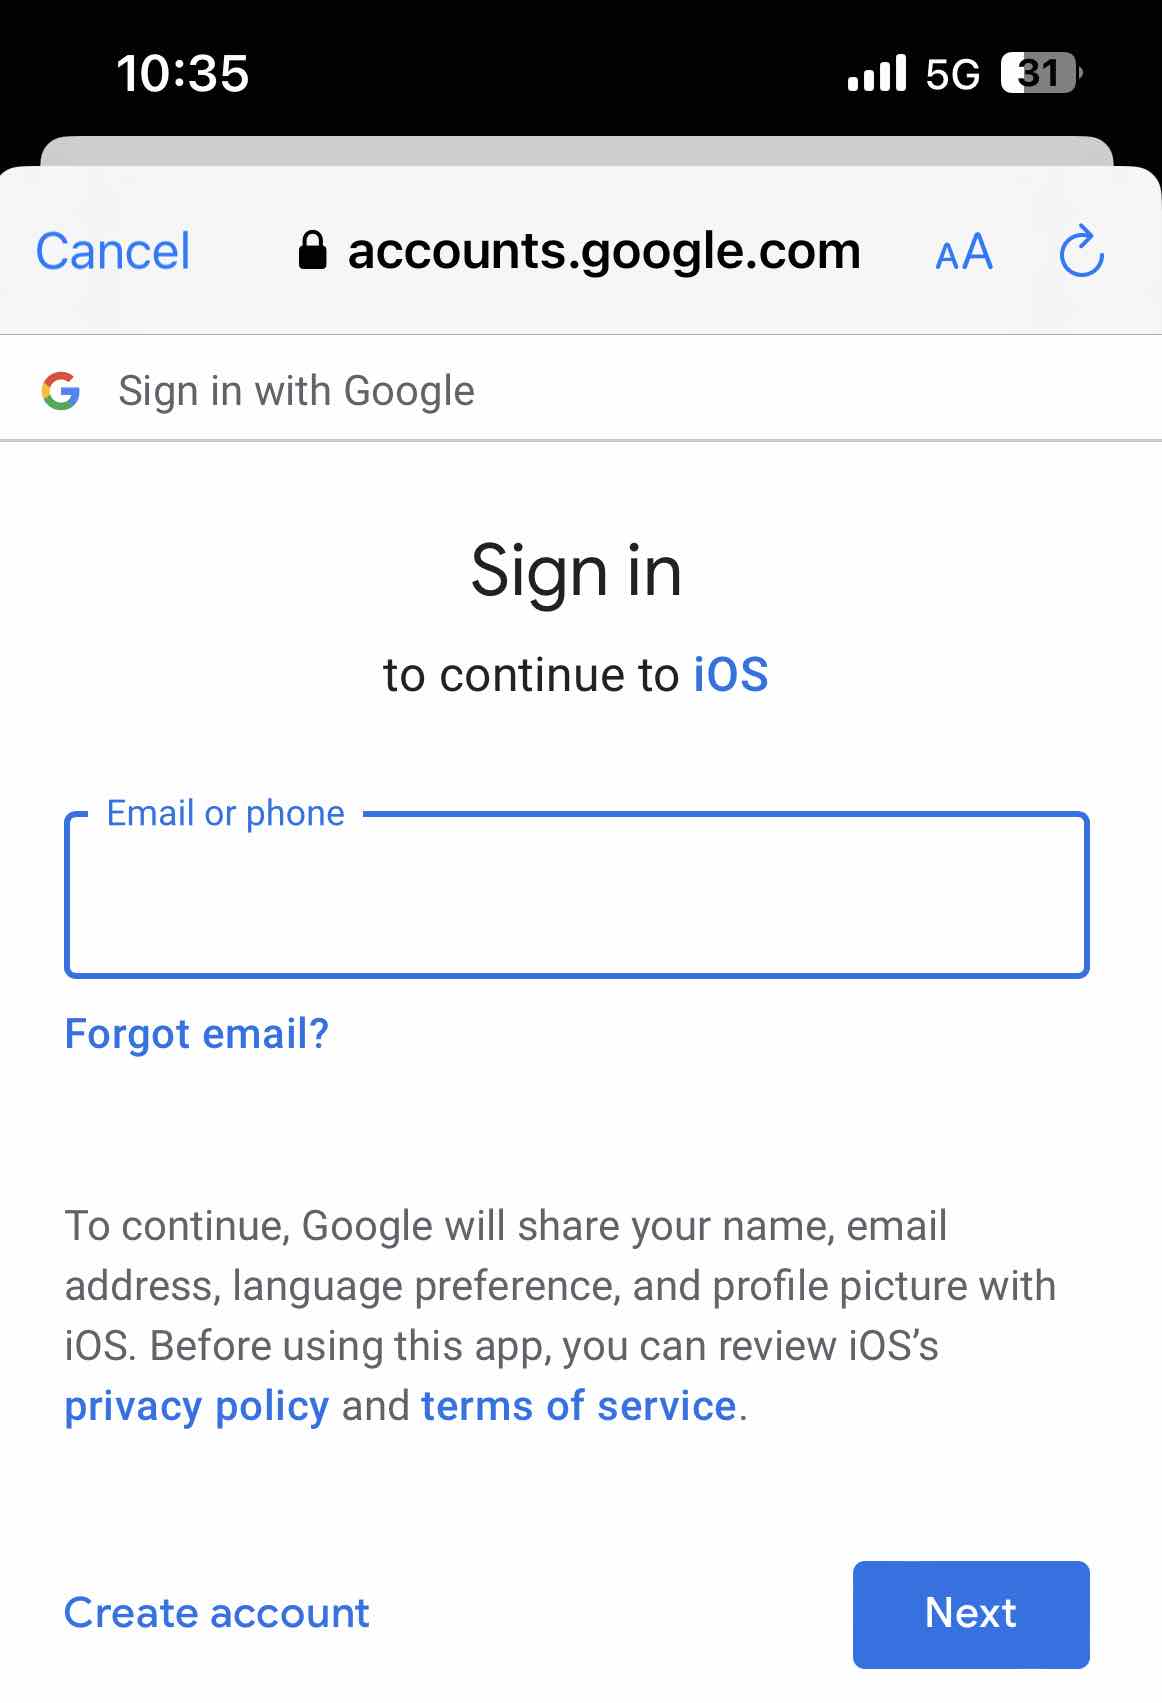 sign in with Google